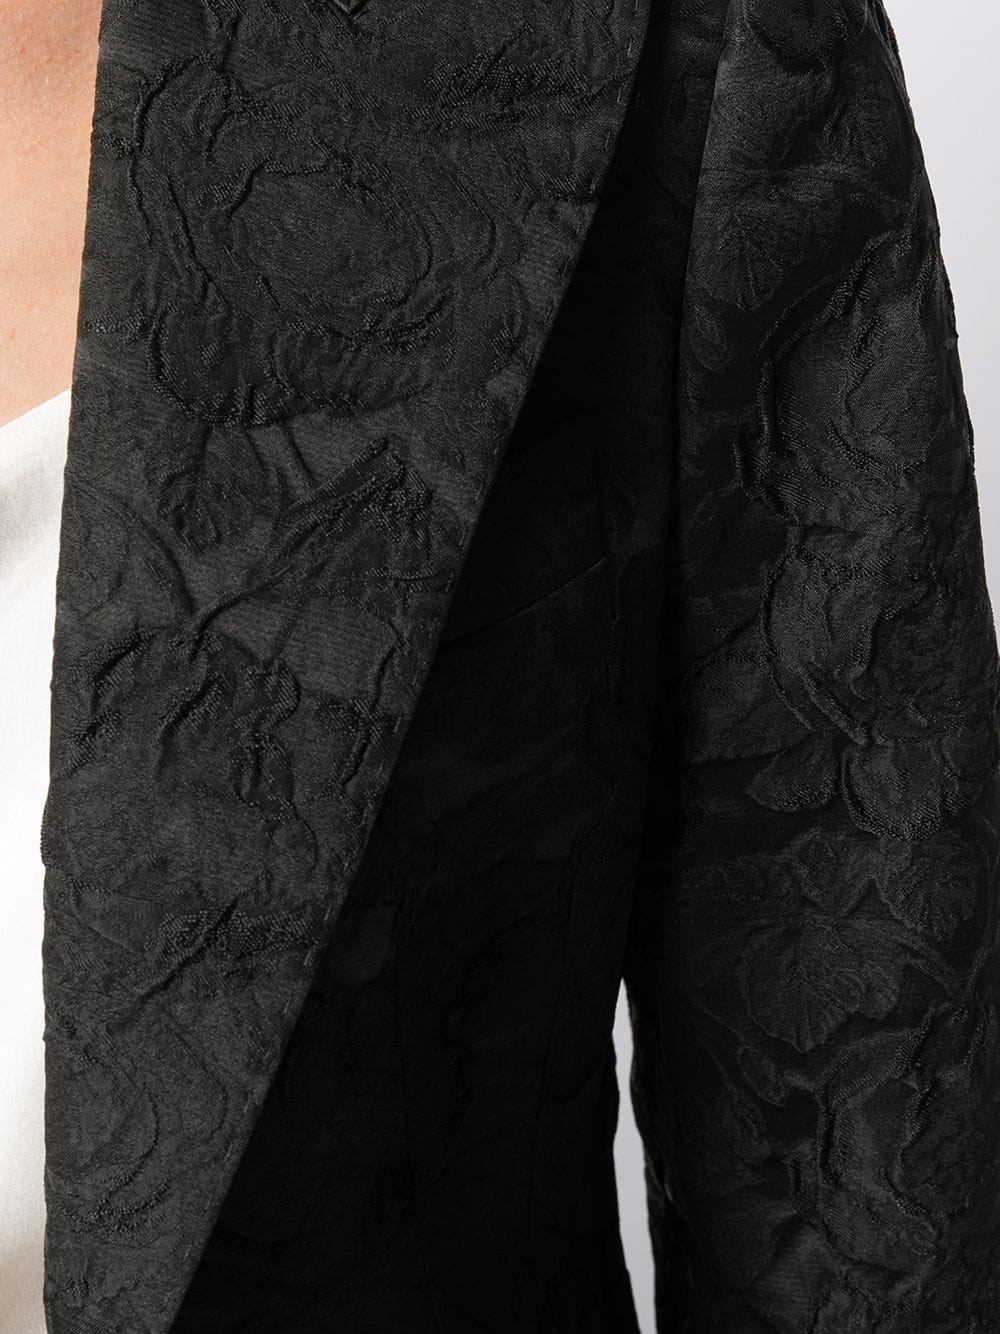 dolce & gabbana BROCADE JACKET available on montiboutique.com - 29494